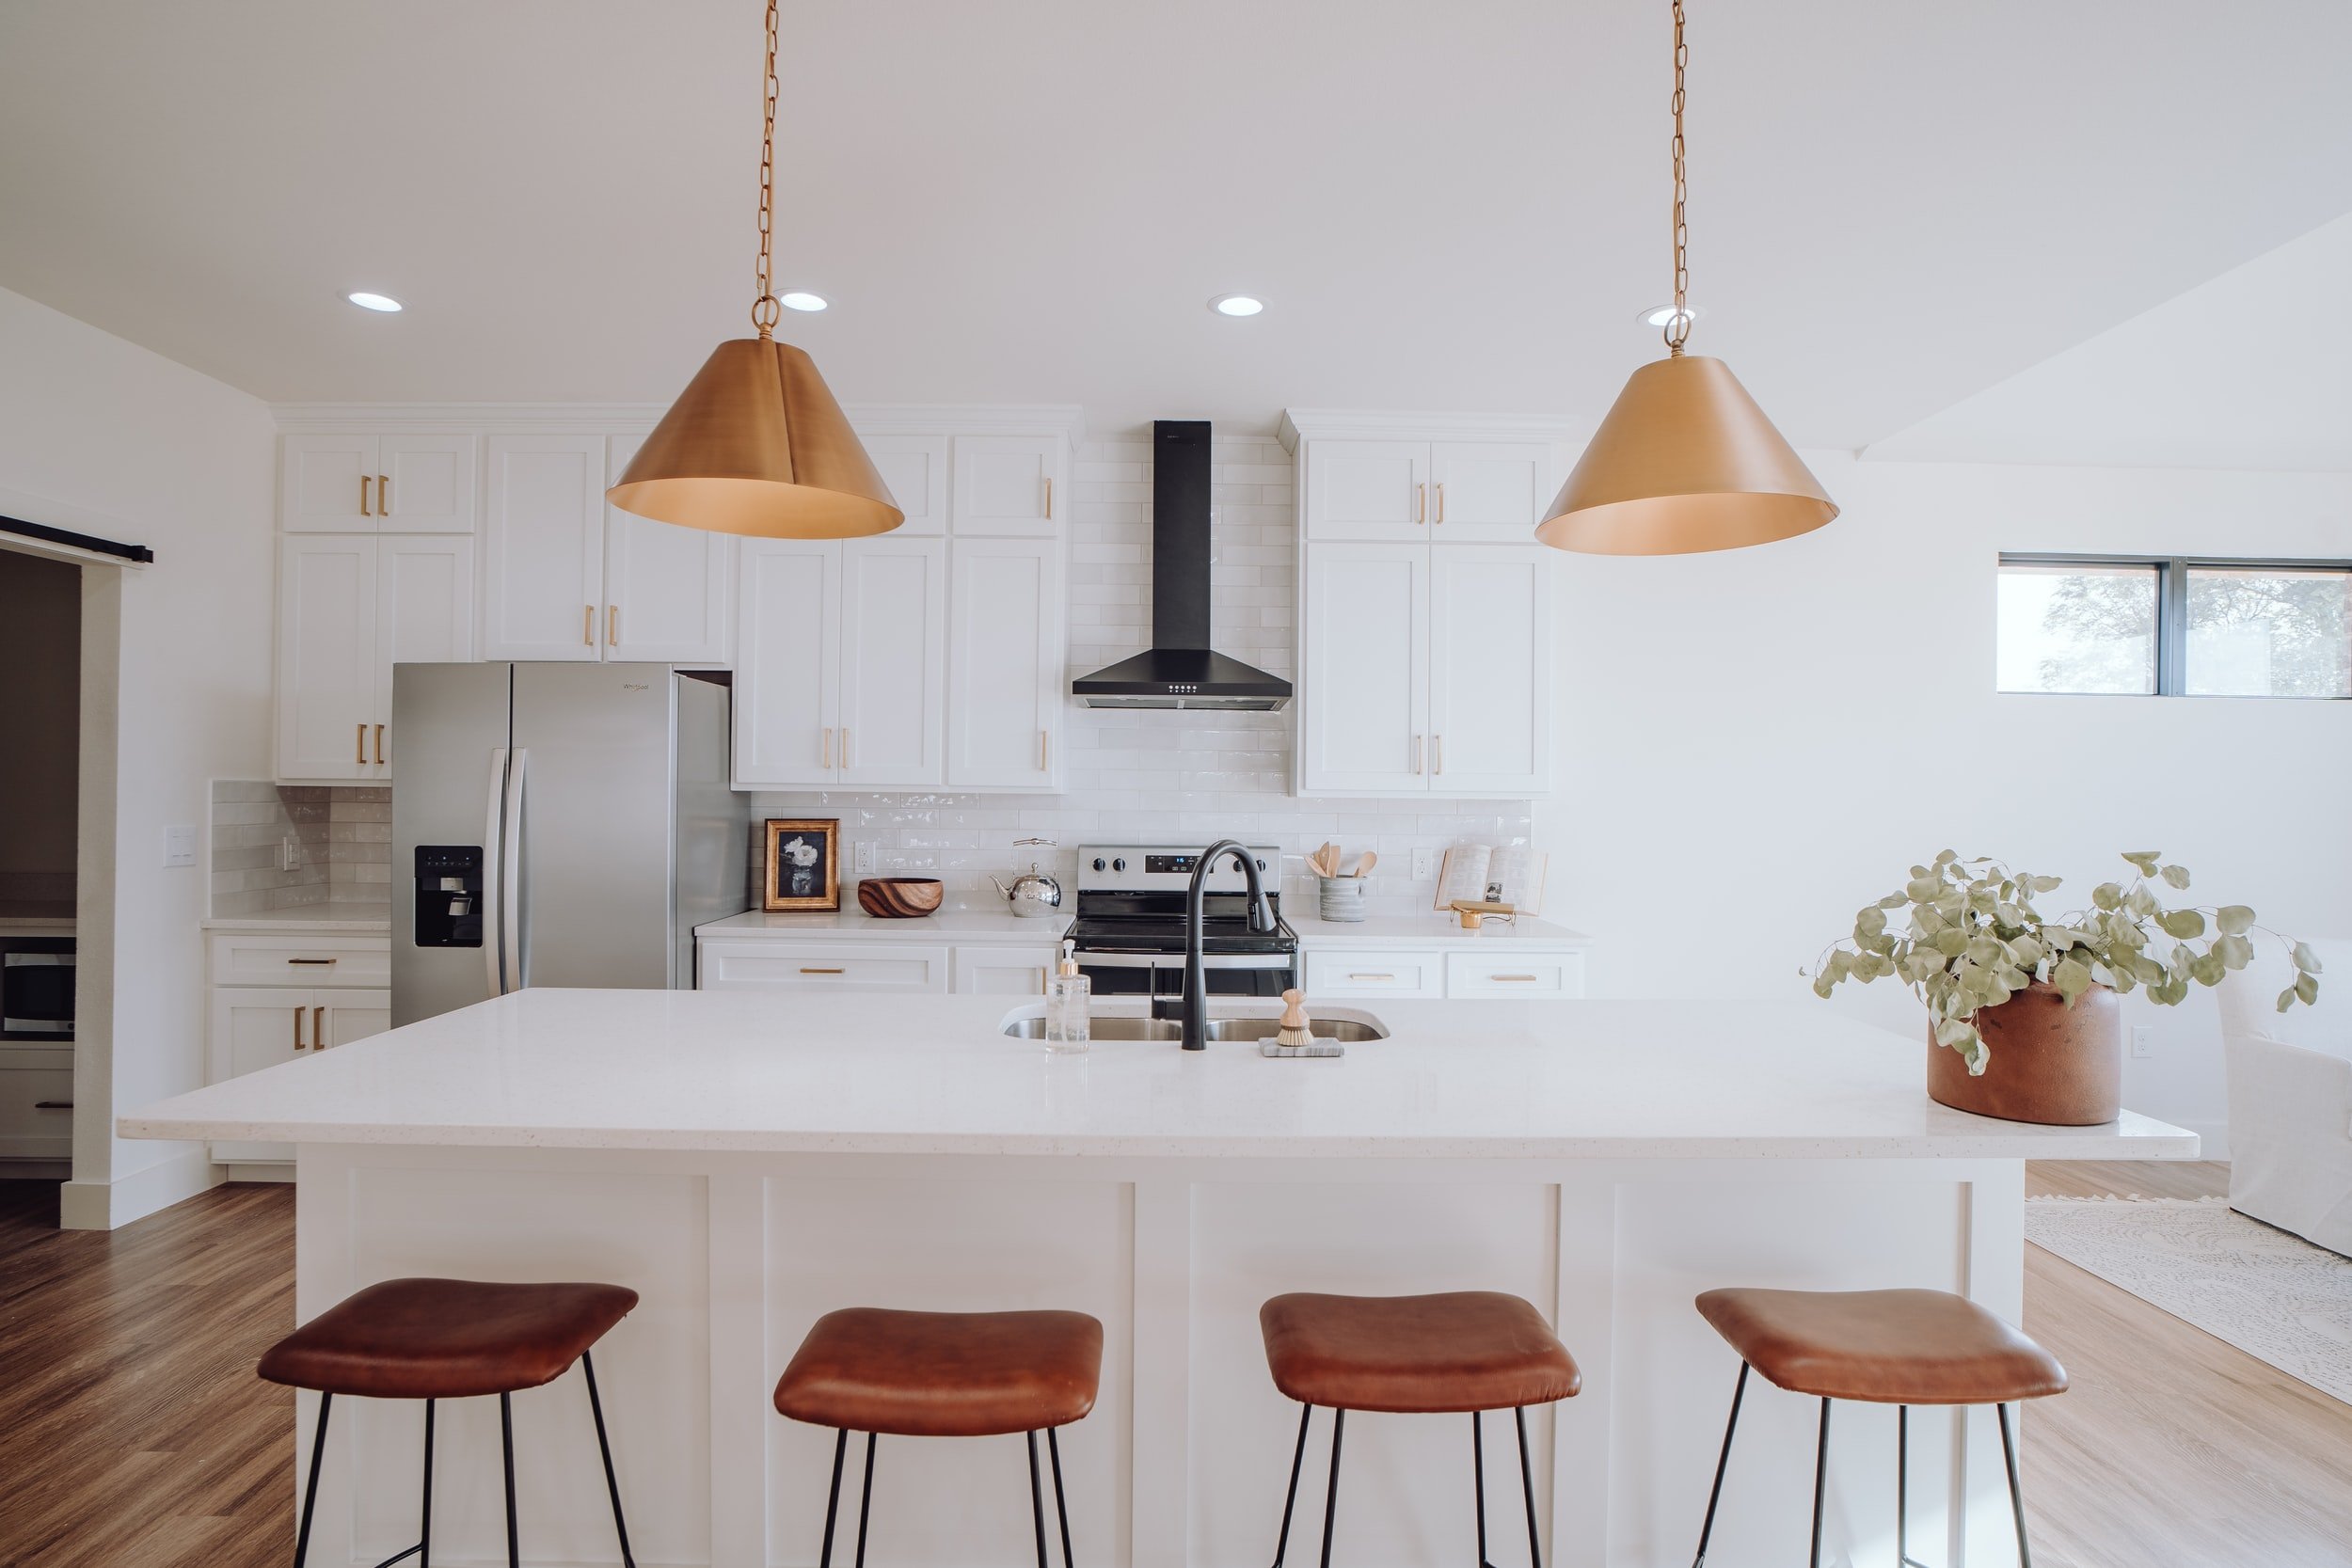 How To Guide For Kitchen Island Lighting — LIVEN DESIGN